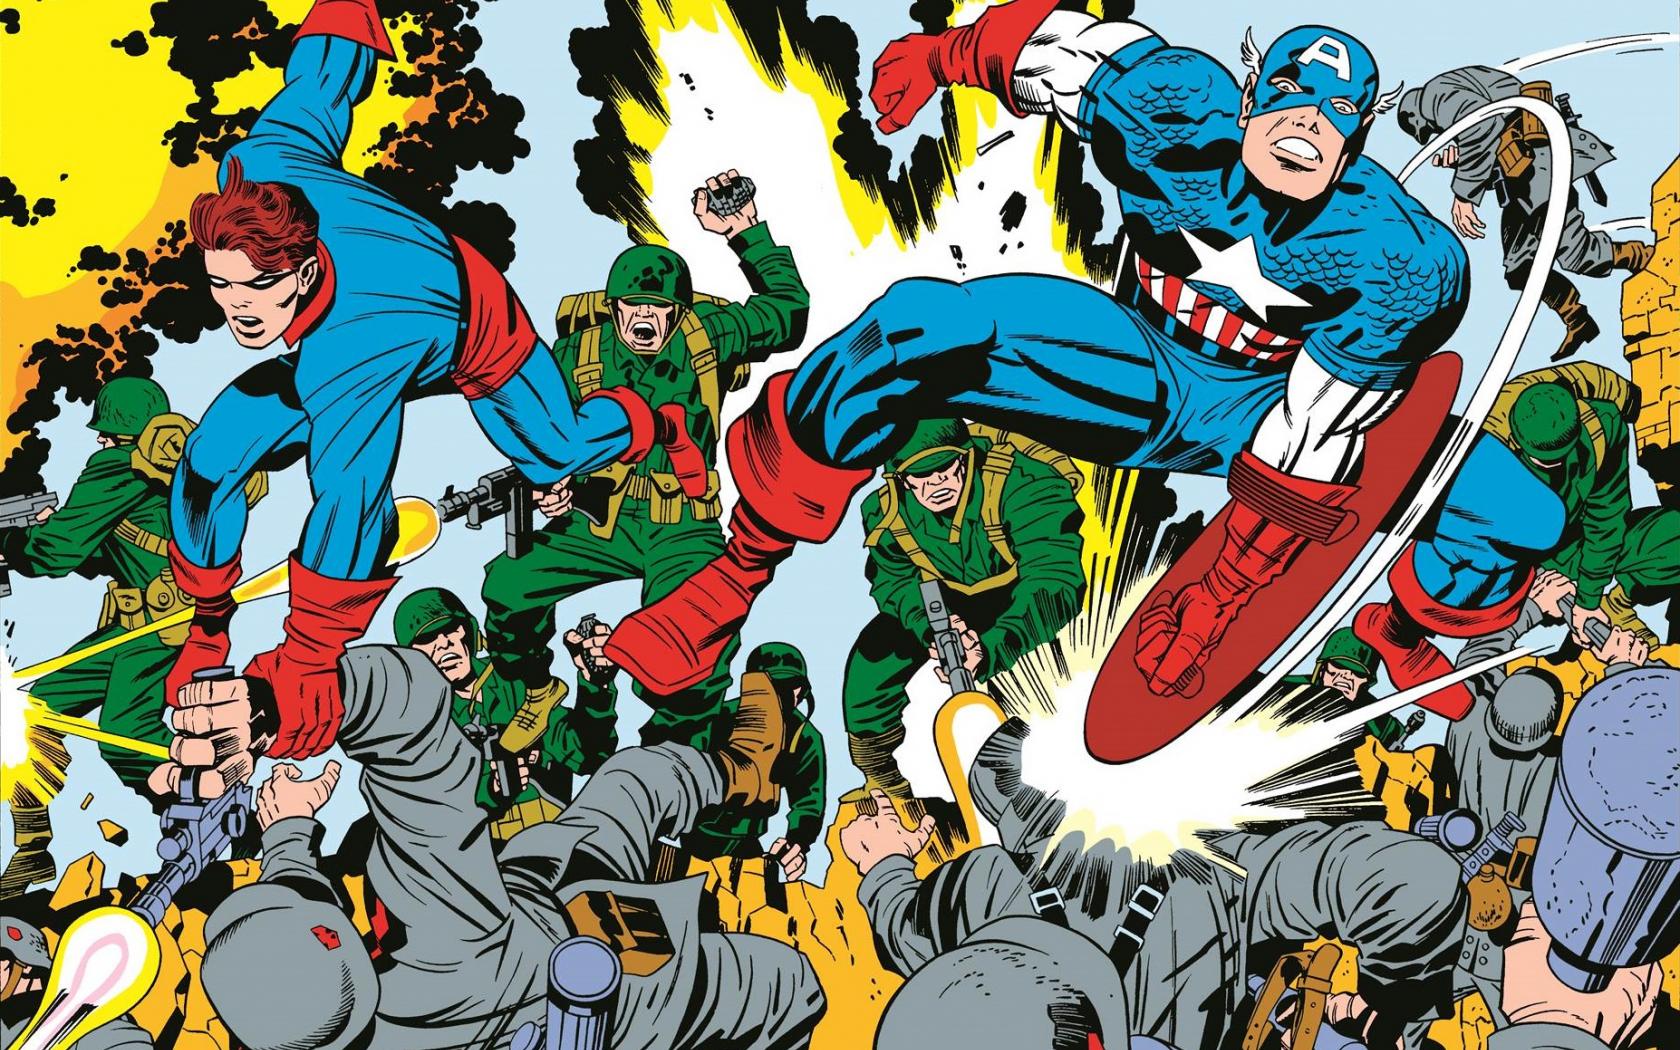 1680 x 1050 · jpeg - Free download Jack Kirby Wallpaper Hail to the king with the king size ...